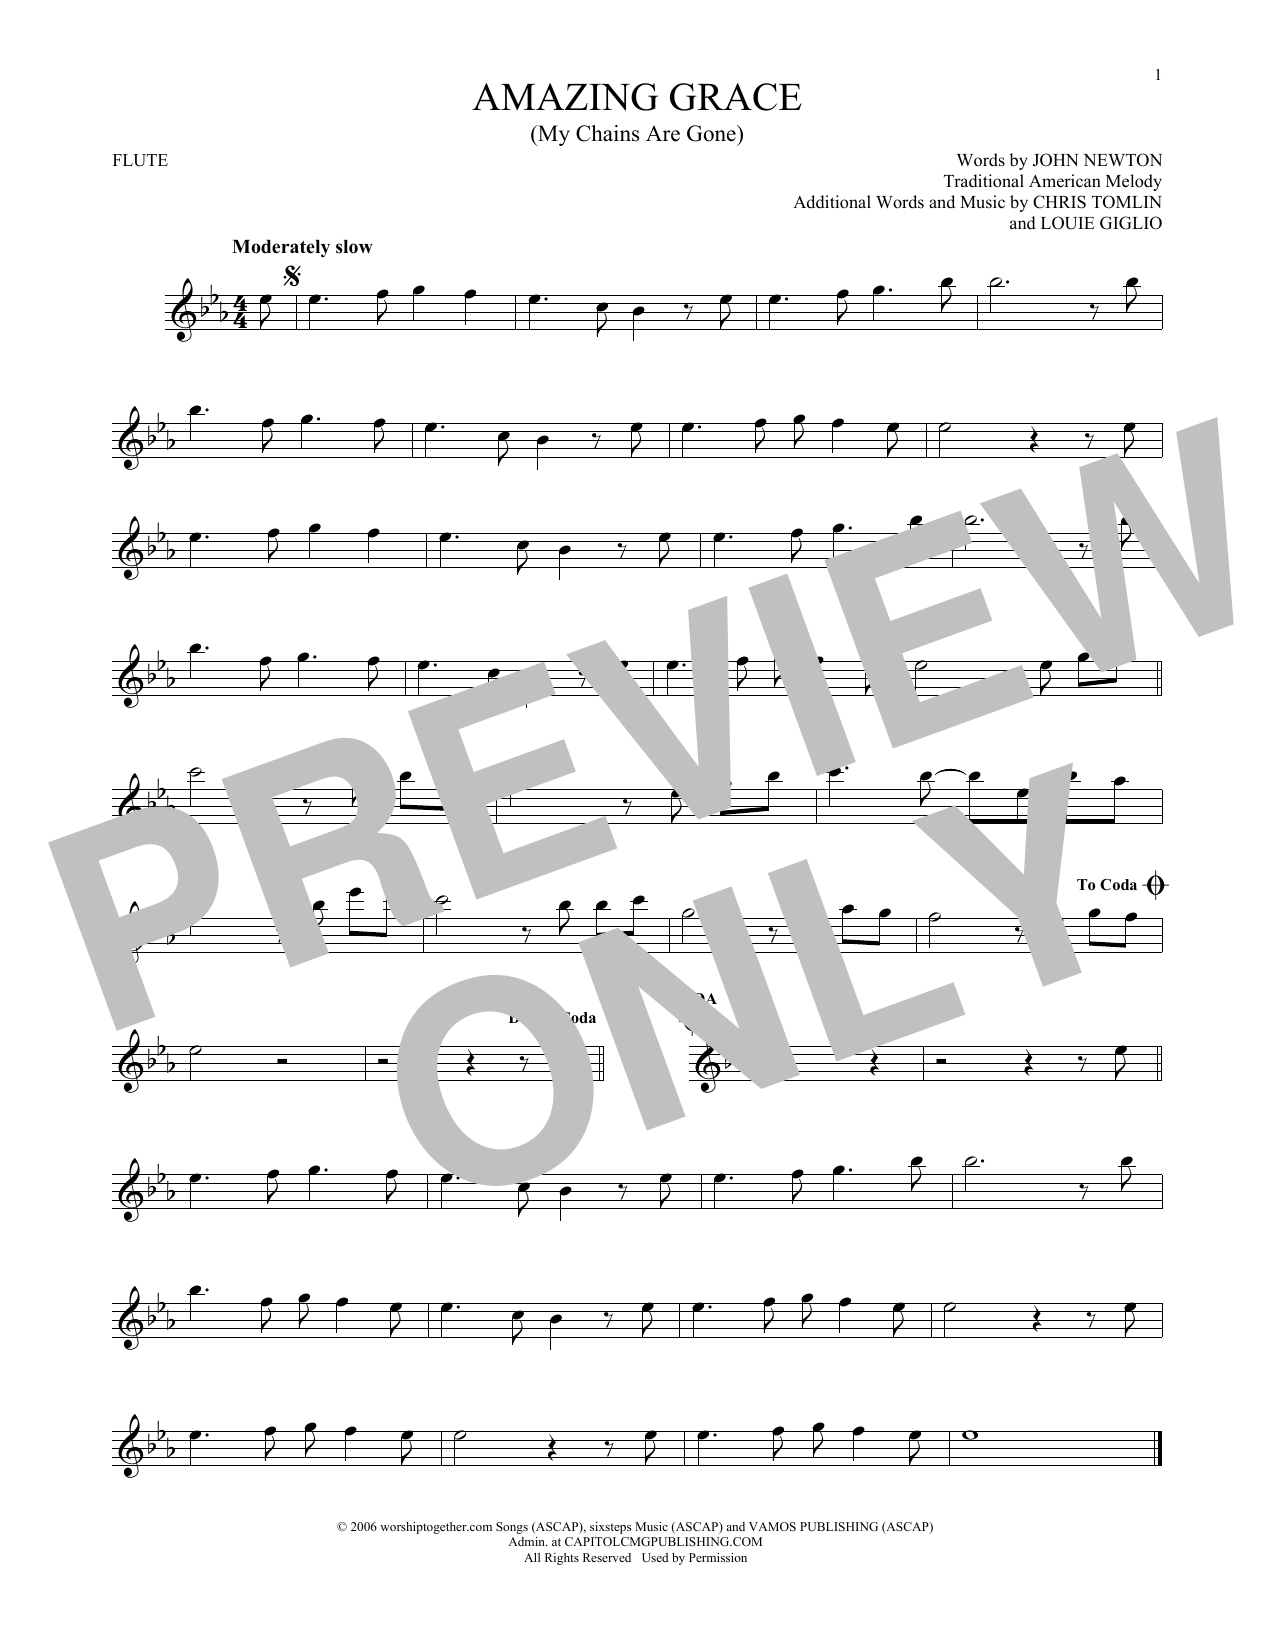 Chris Tomlin Amazing Grace (My Chains Are Gone) sheet music notes printable PDF score